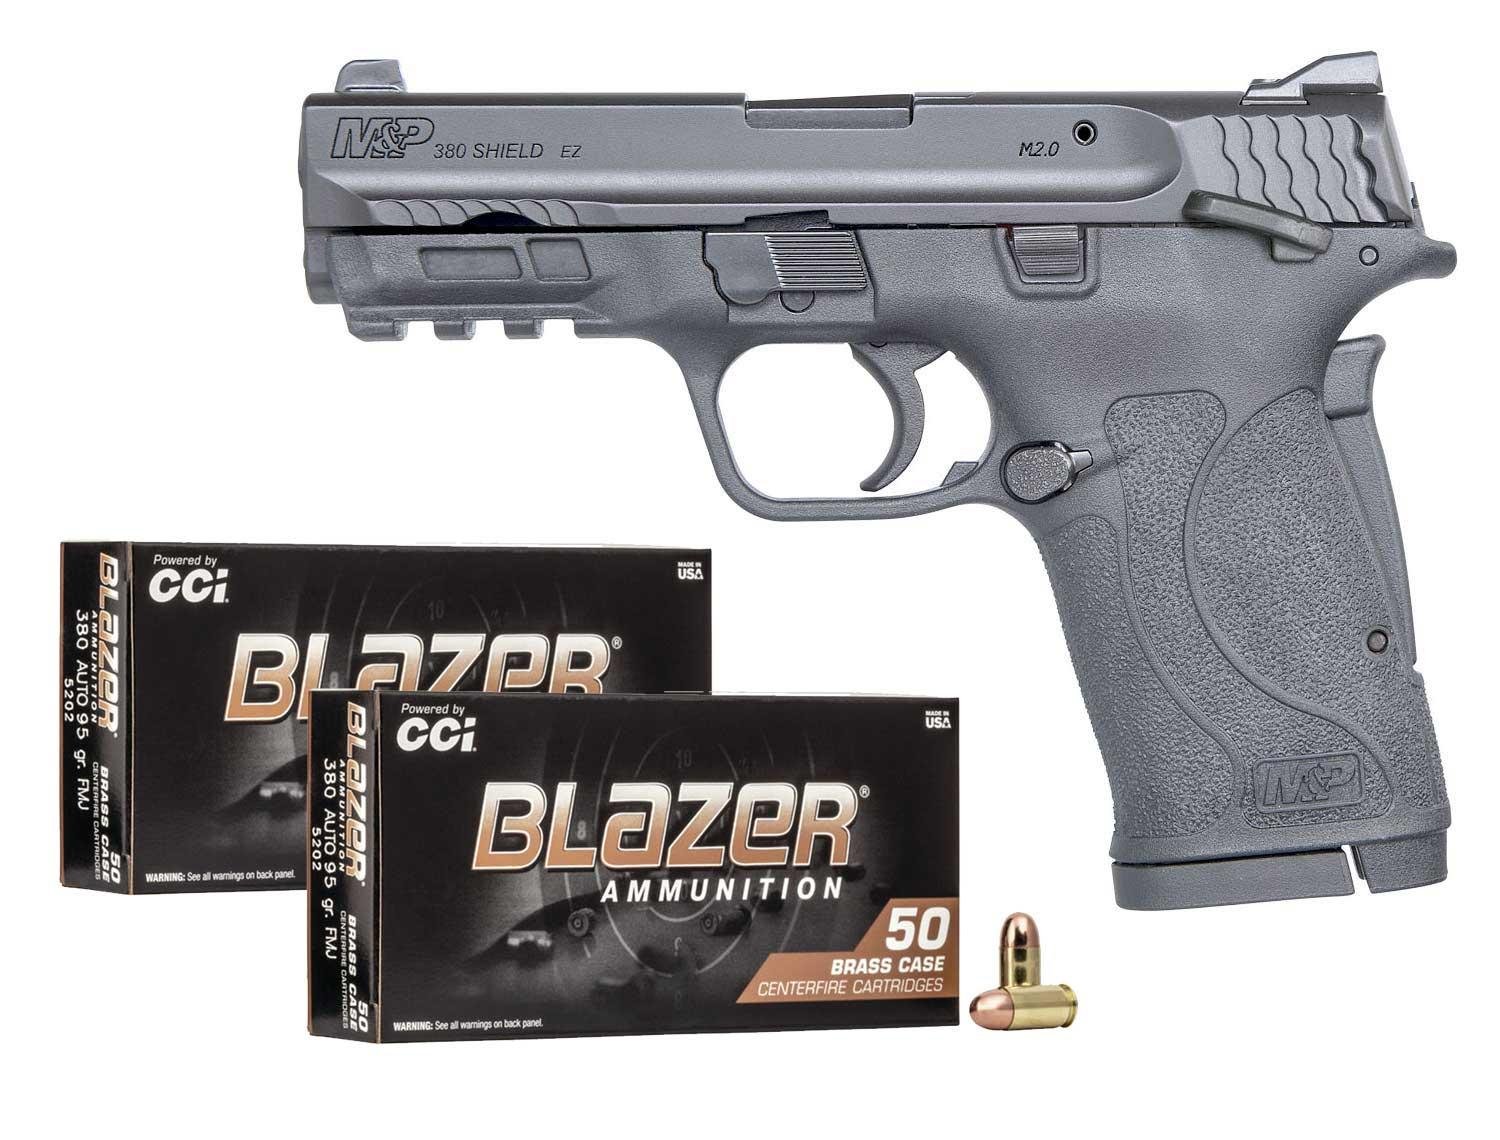 SMITH & WESSON M&P 380 Shield EZ Manual Thumb Safety +2 Boxes of Blazer Ammo - $379.99 (Free S/H on Firearms)